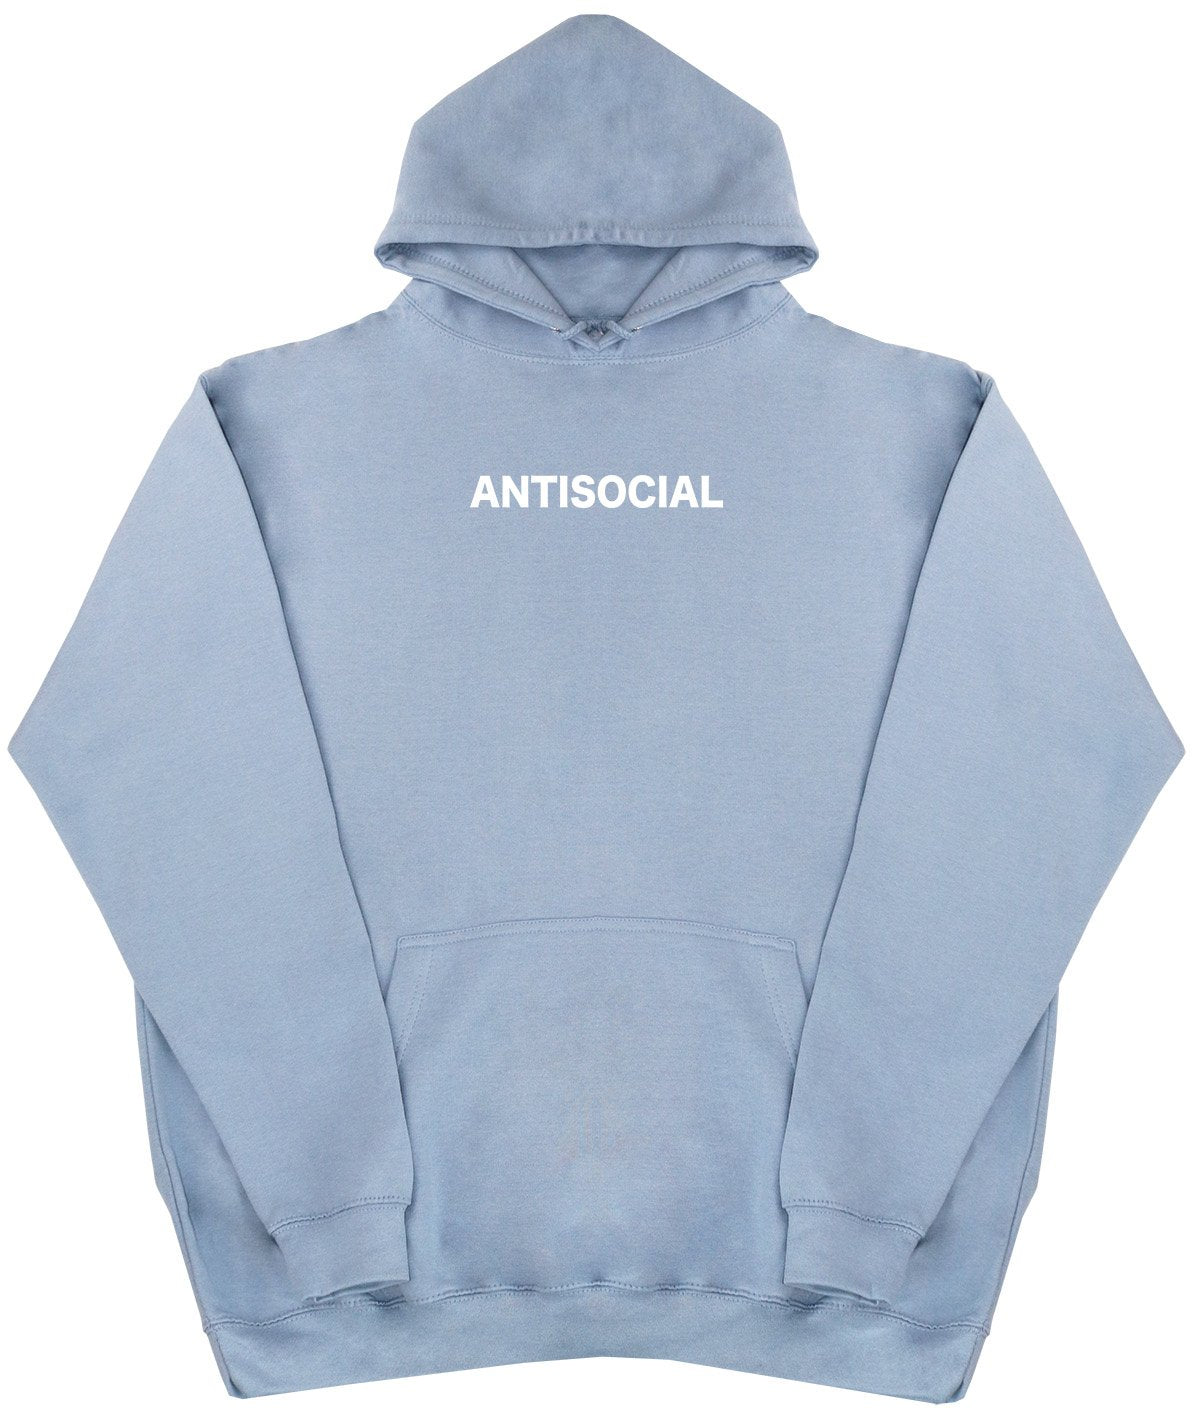 Antisocial - New Style - Huge Size - Oversized Comfy Hoody